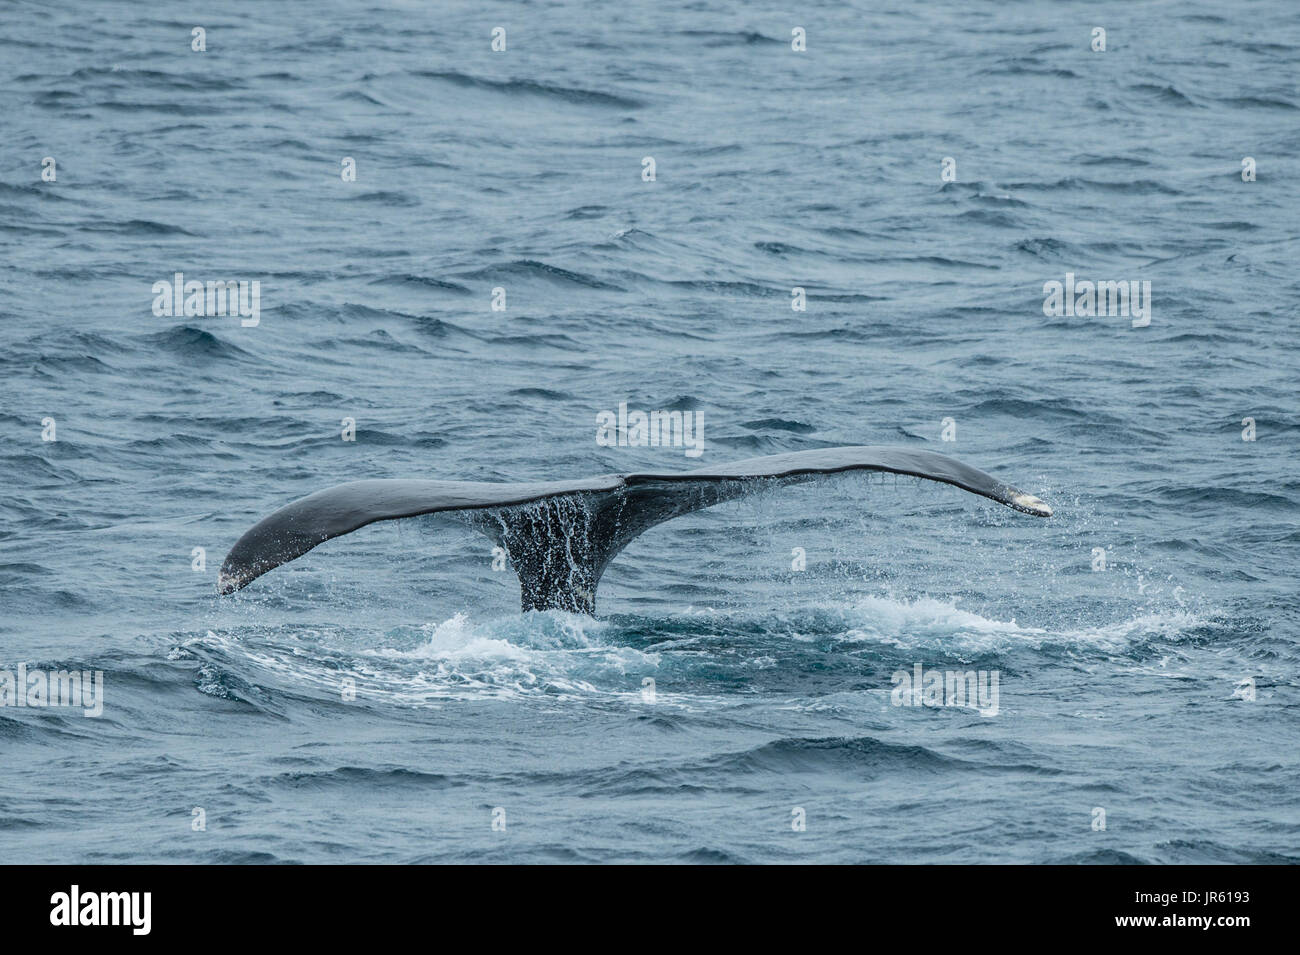 Bowhead Whale swimming and showing its fluke in the Arctic Ocean. Stock Photo